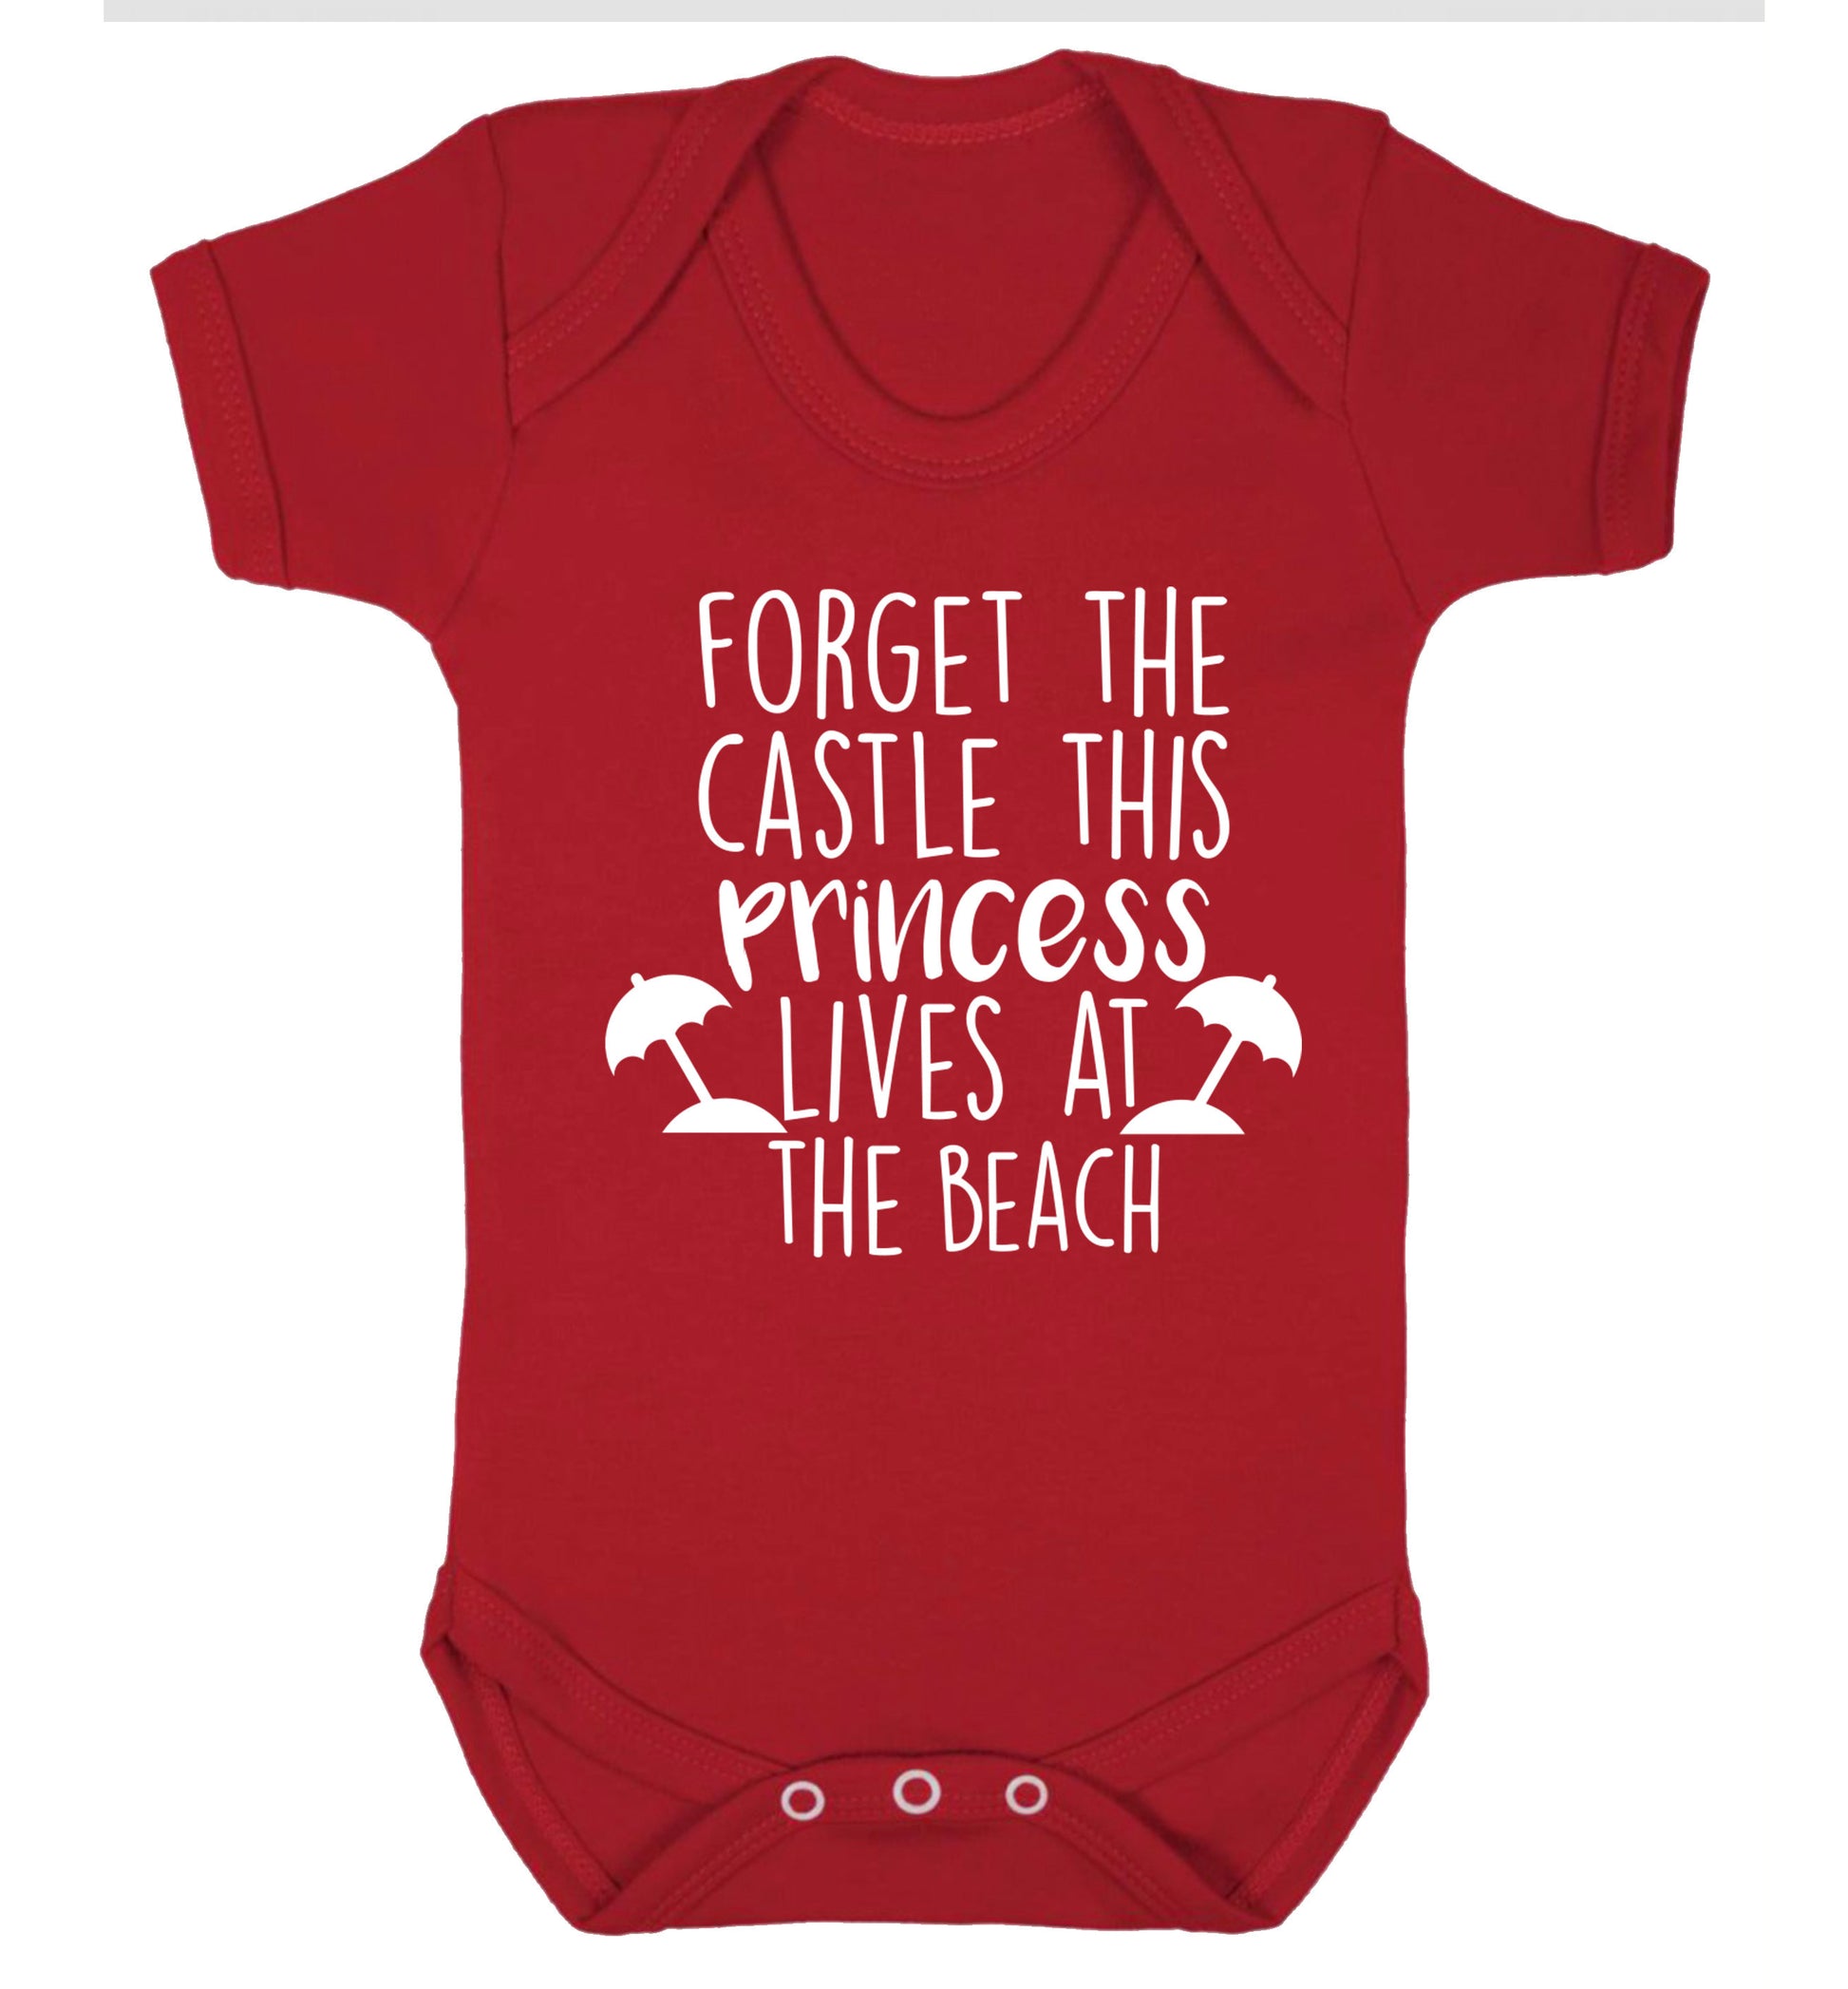 Forget the castle this princess lives at the beach Baby Vest red 18-24 months